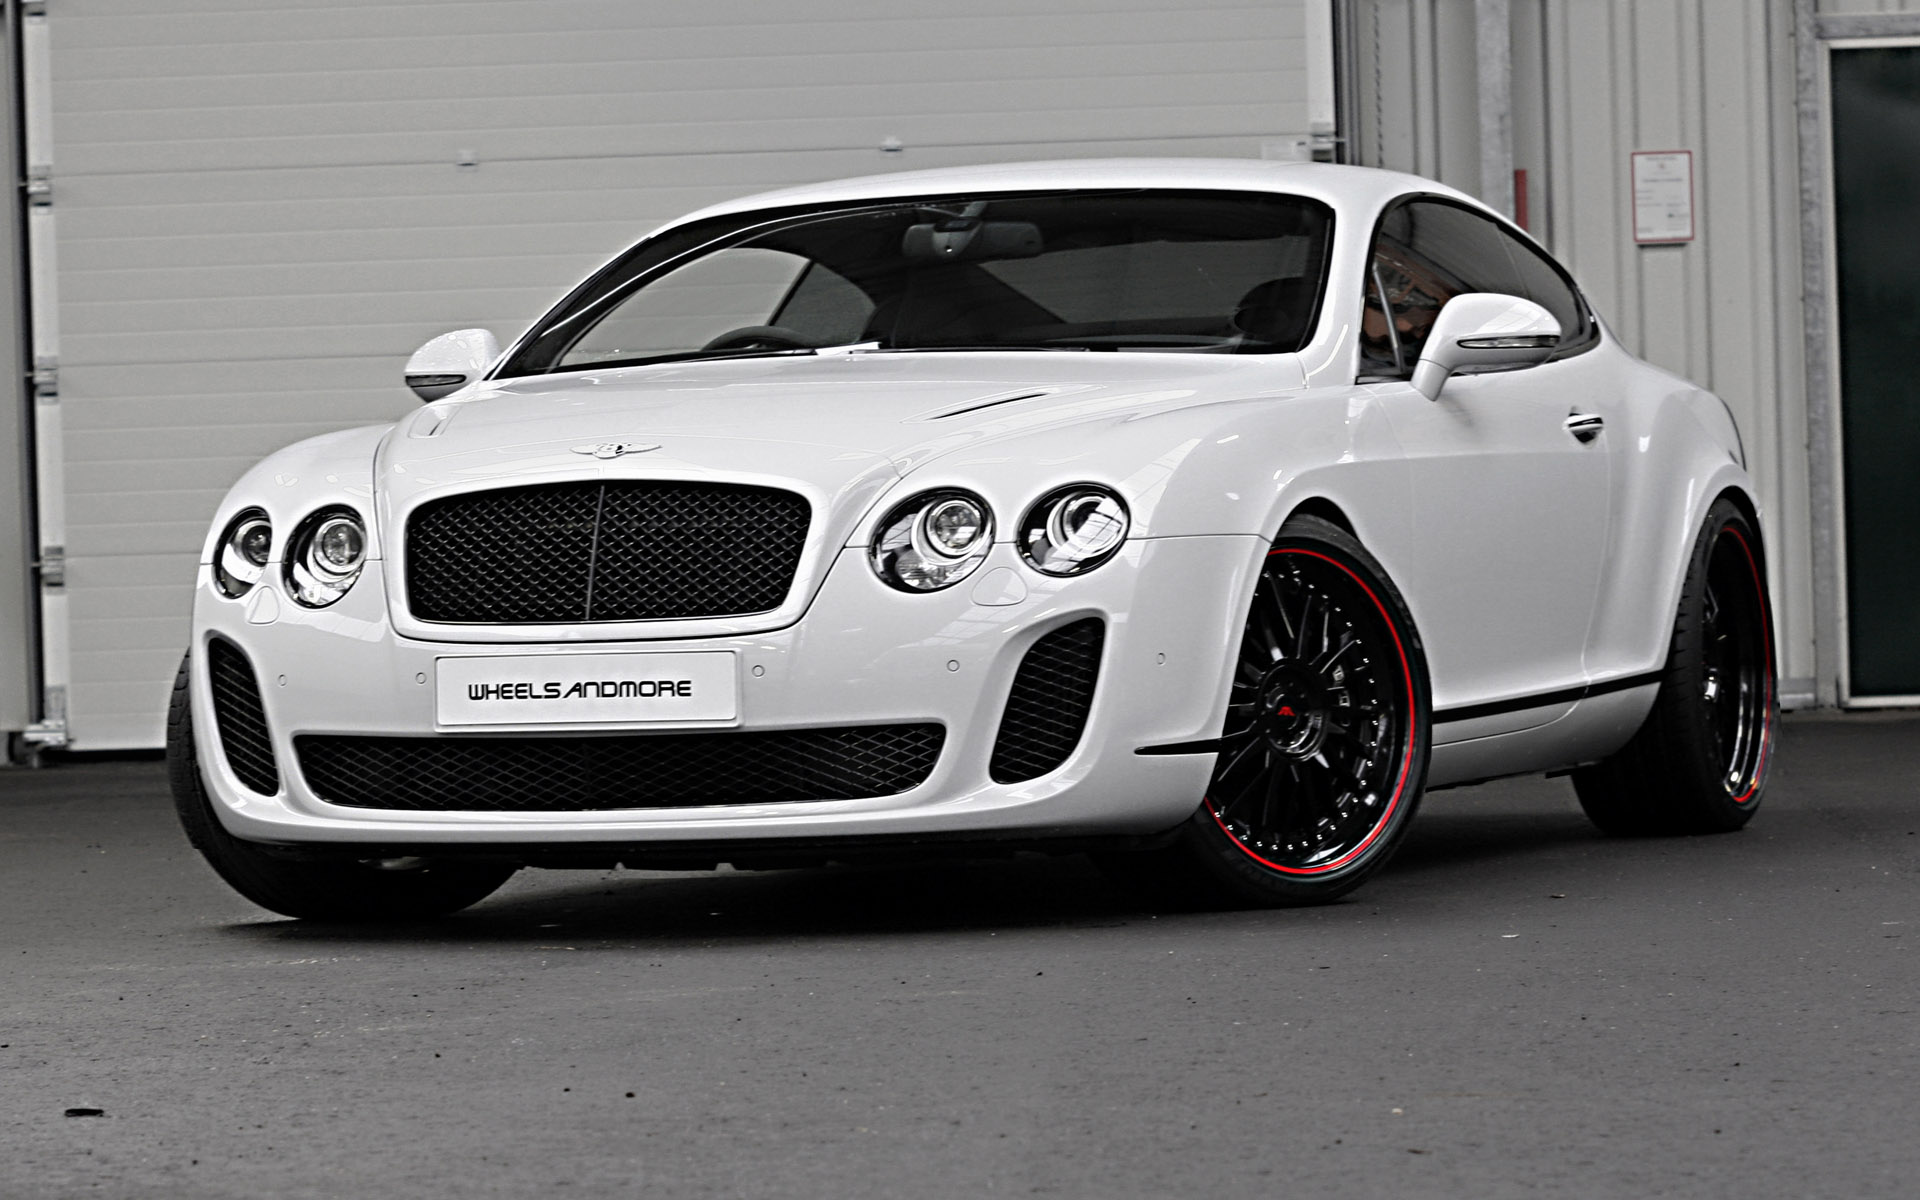 2011, Wheelsandmore, Bentley, Continental, Supersport, Luxury, Tuning, Supercar, Supercars Wallpaper